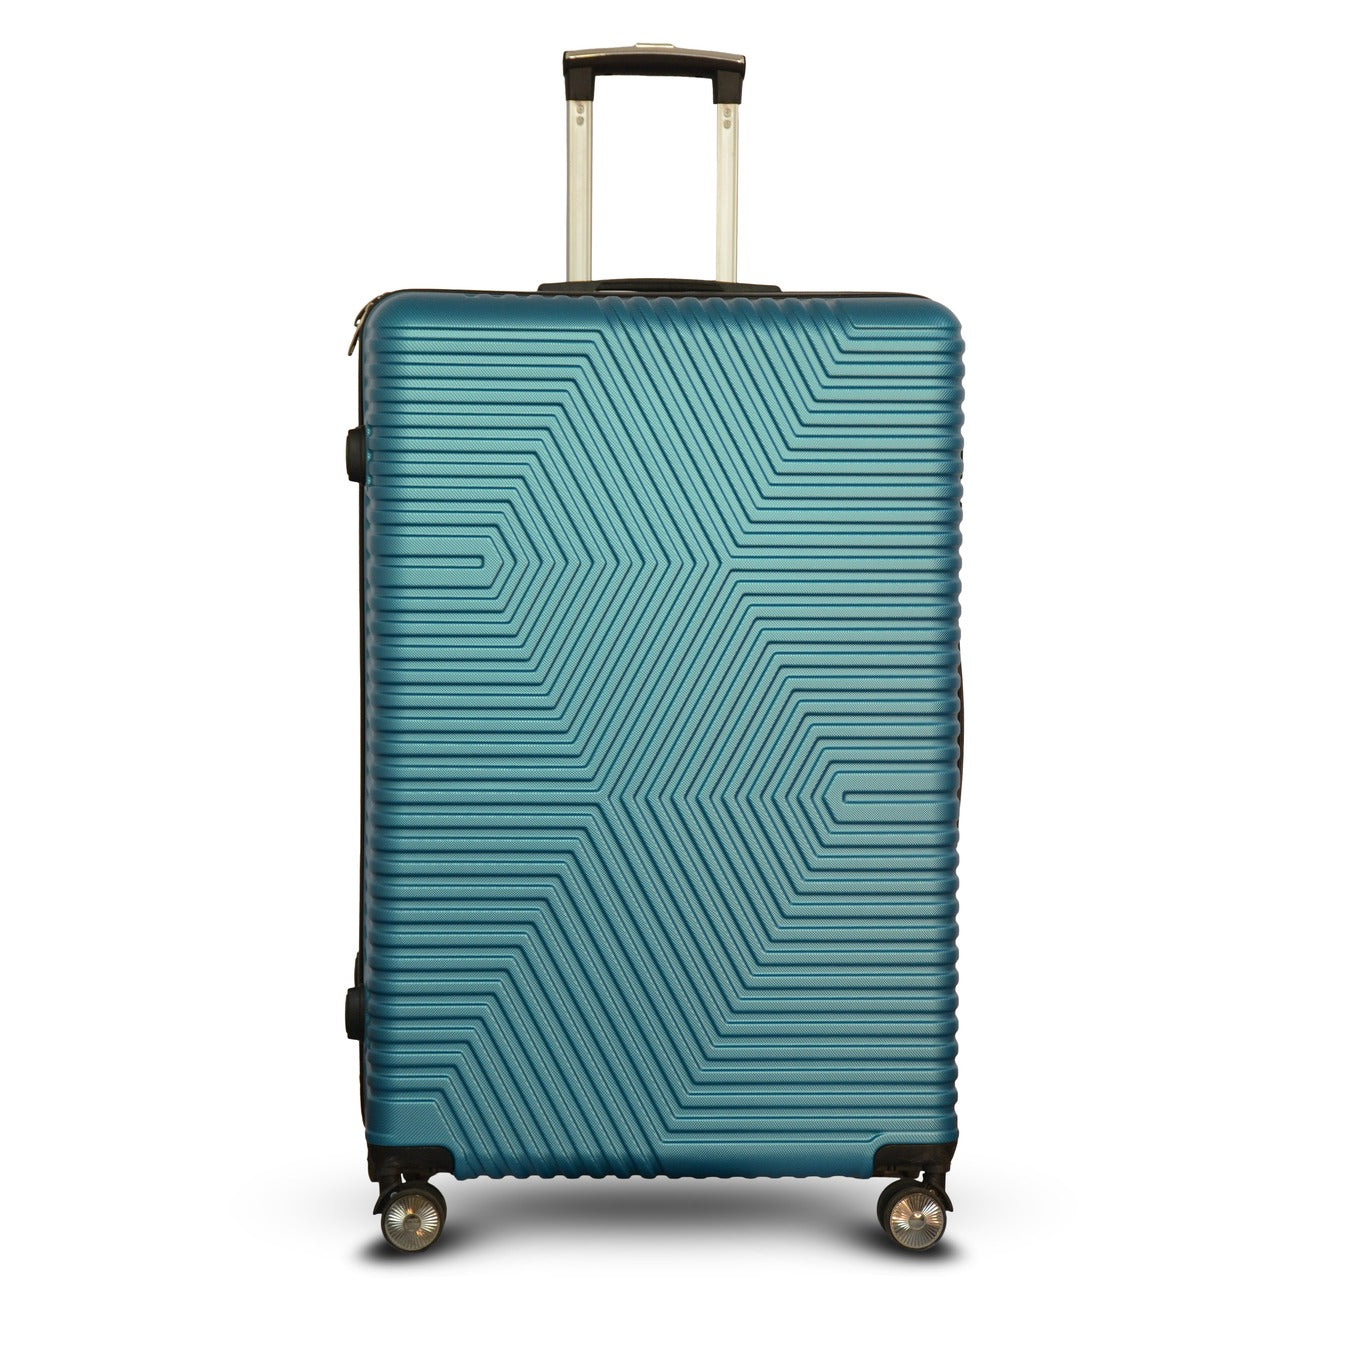  Sea Blue Colour Zig Zag ABS Lightweight Luggage Bag With Double Spinner Wheel Zaappy